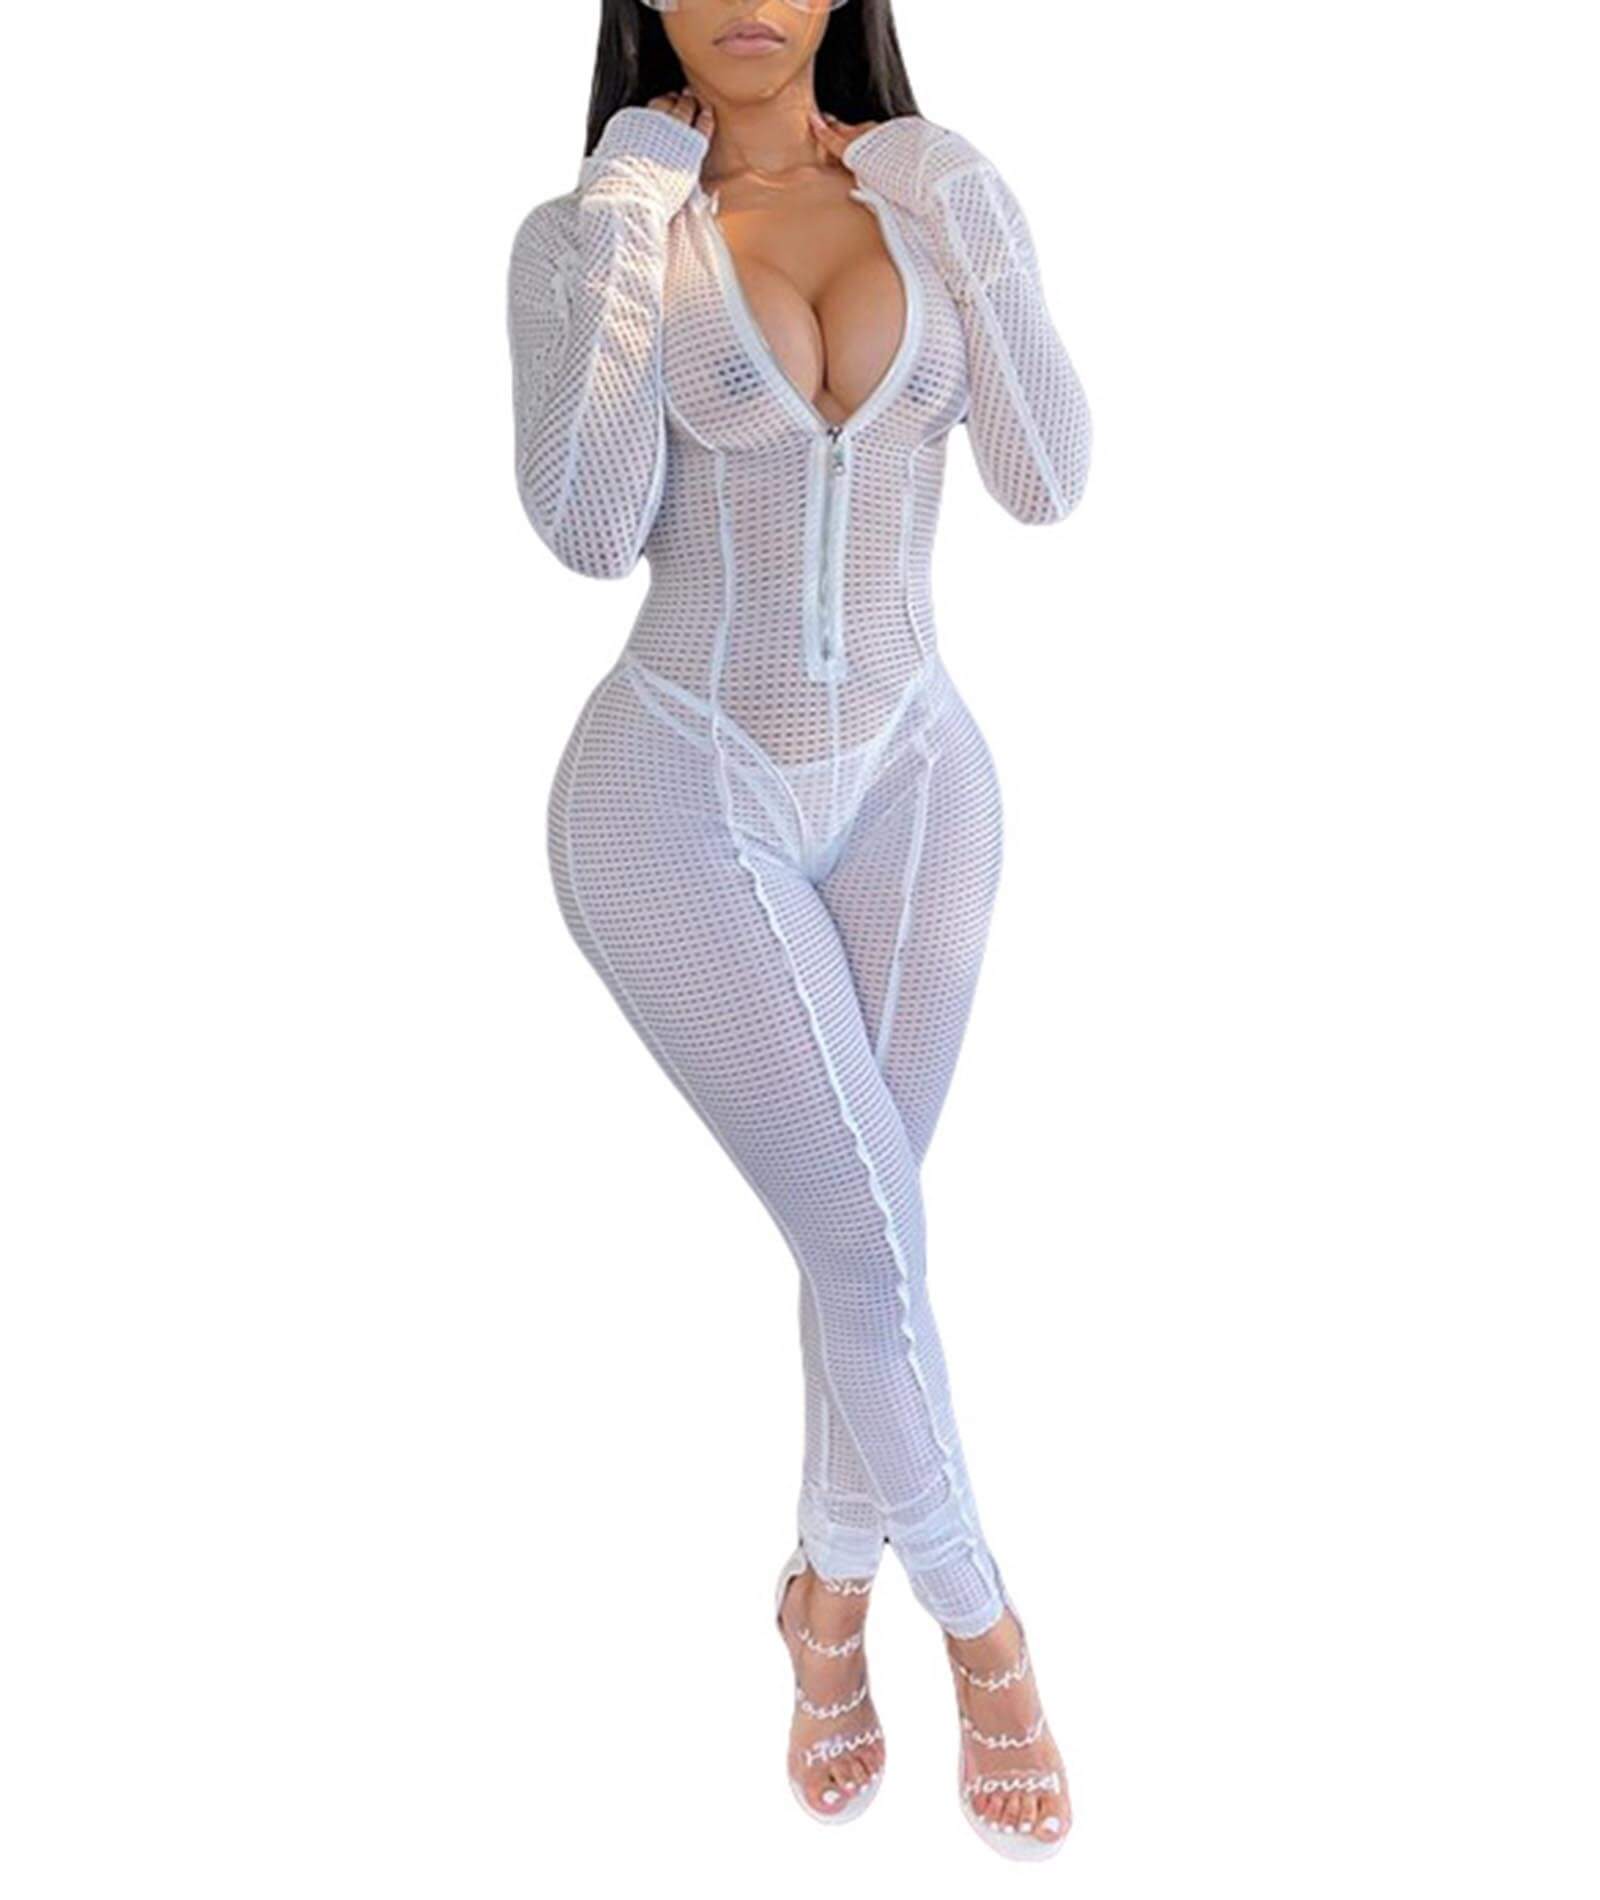 NZGSTR One Piece Outfits for Women Zip Up Bodycon Jumpsuit Long Sleeve Bodysuit Sheer Mesh Skinny Pants See Through Clubwear